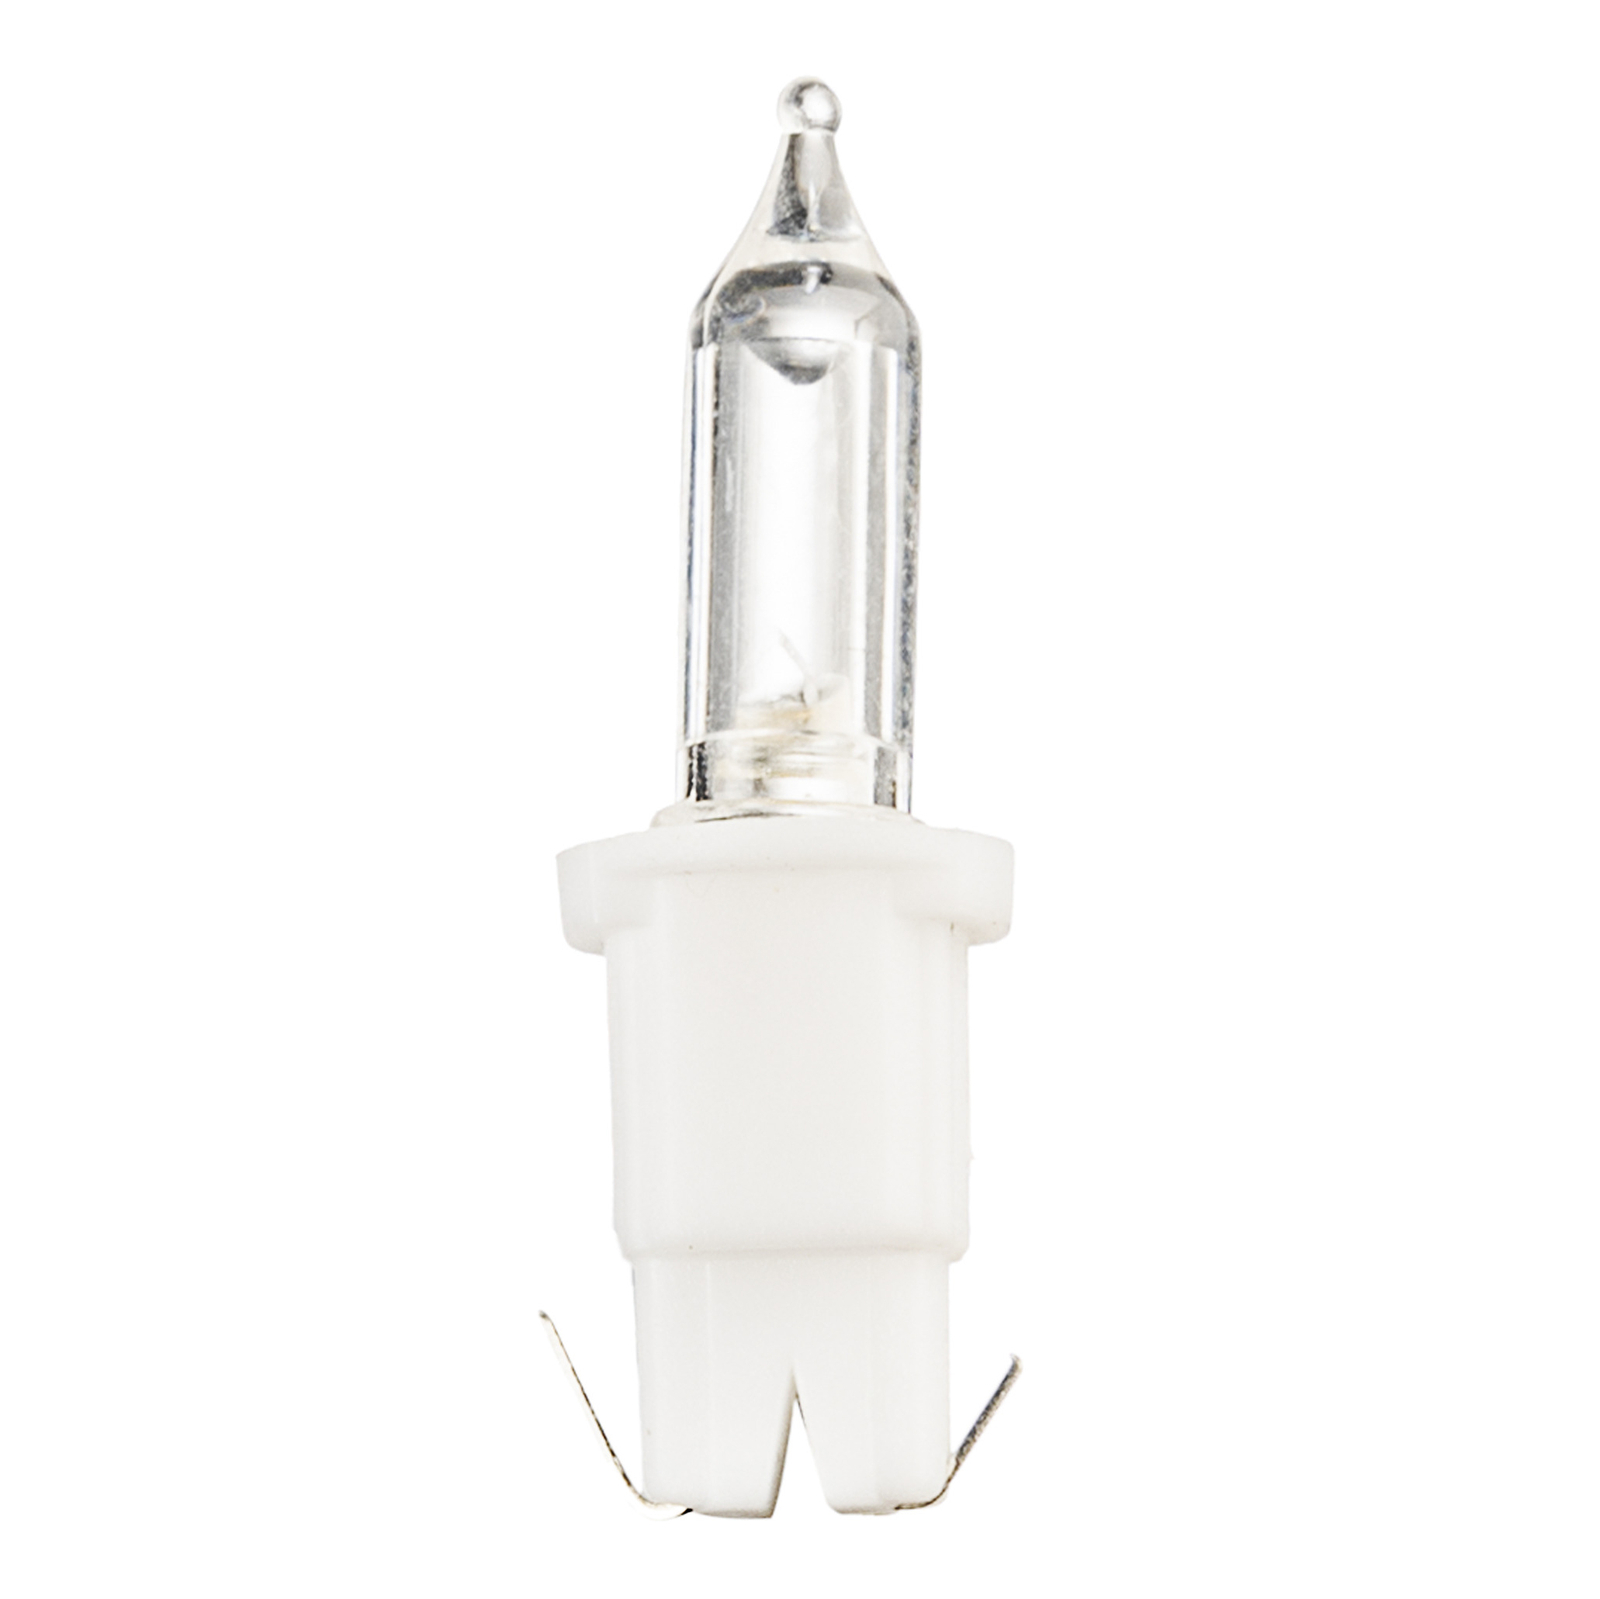 Push-in 0.06 W 3 V spare bulbs in pack of 3